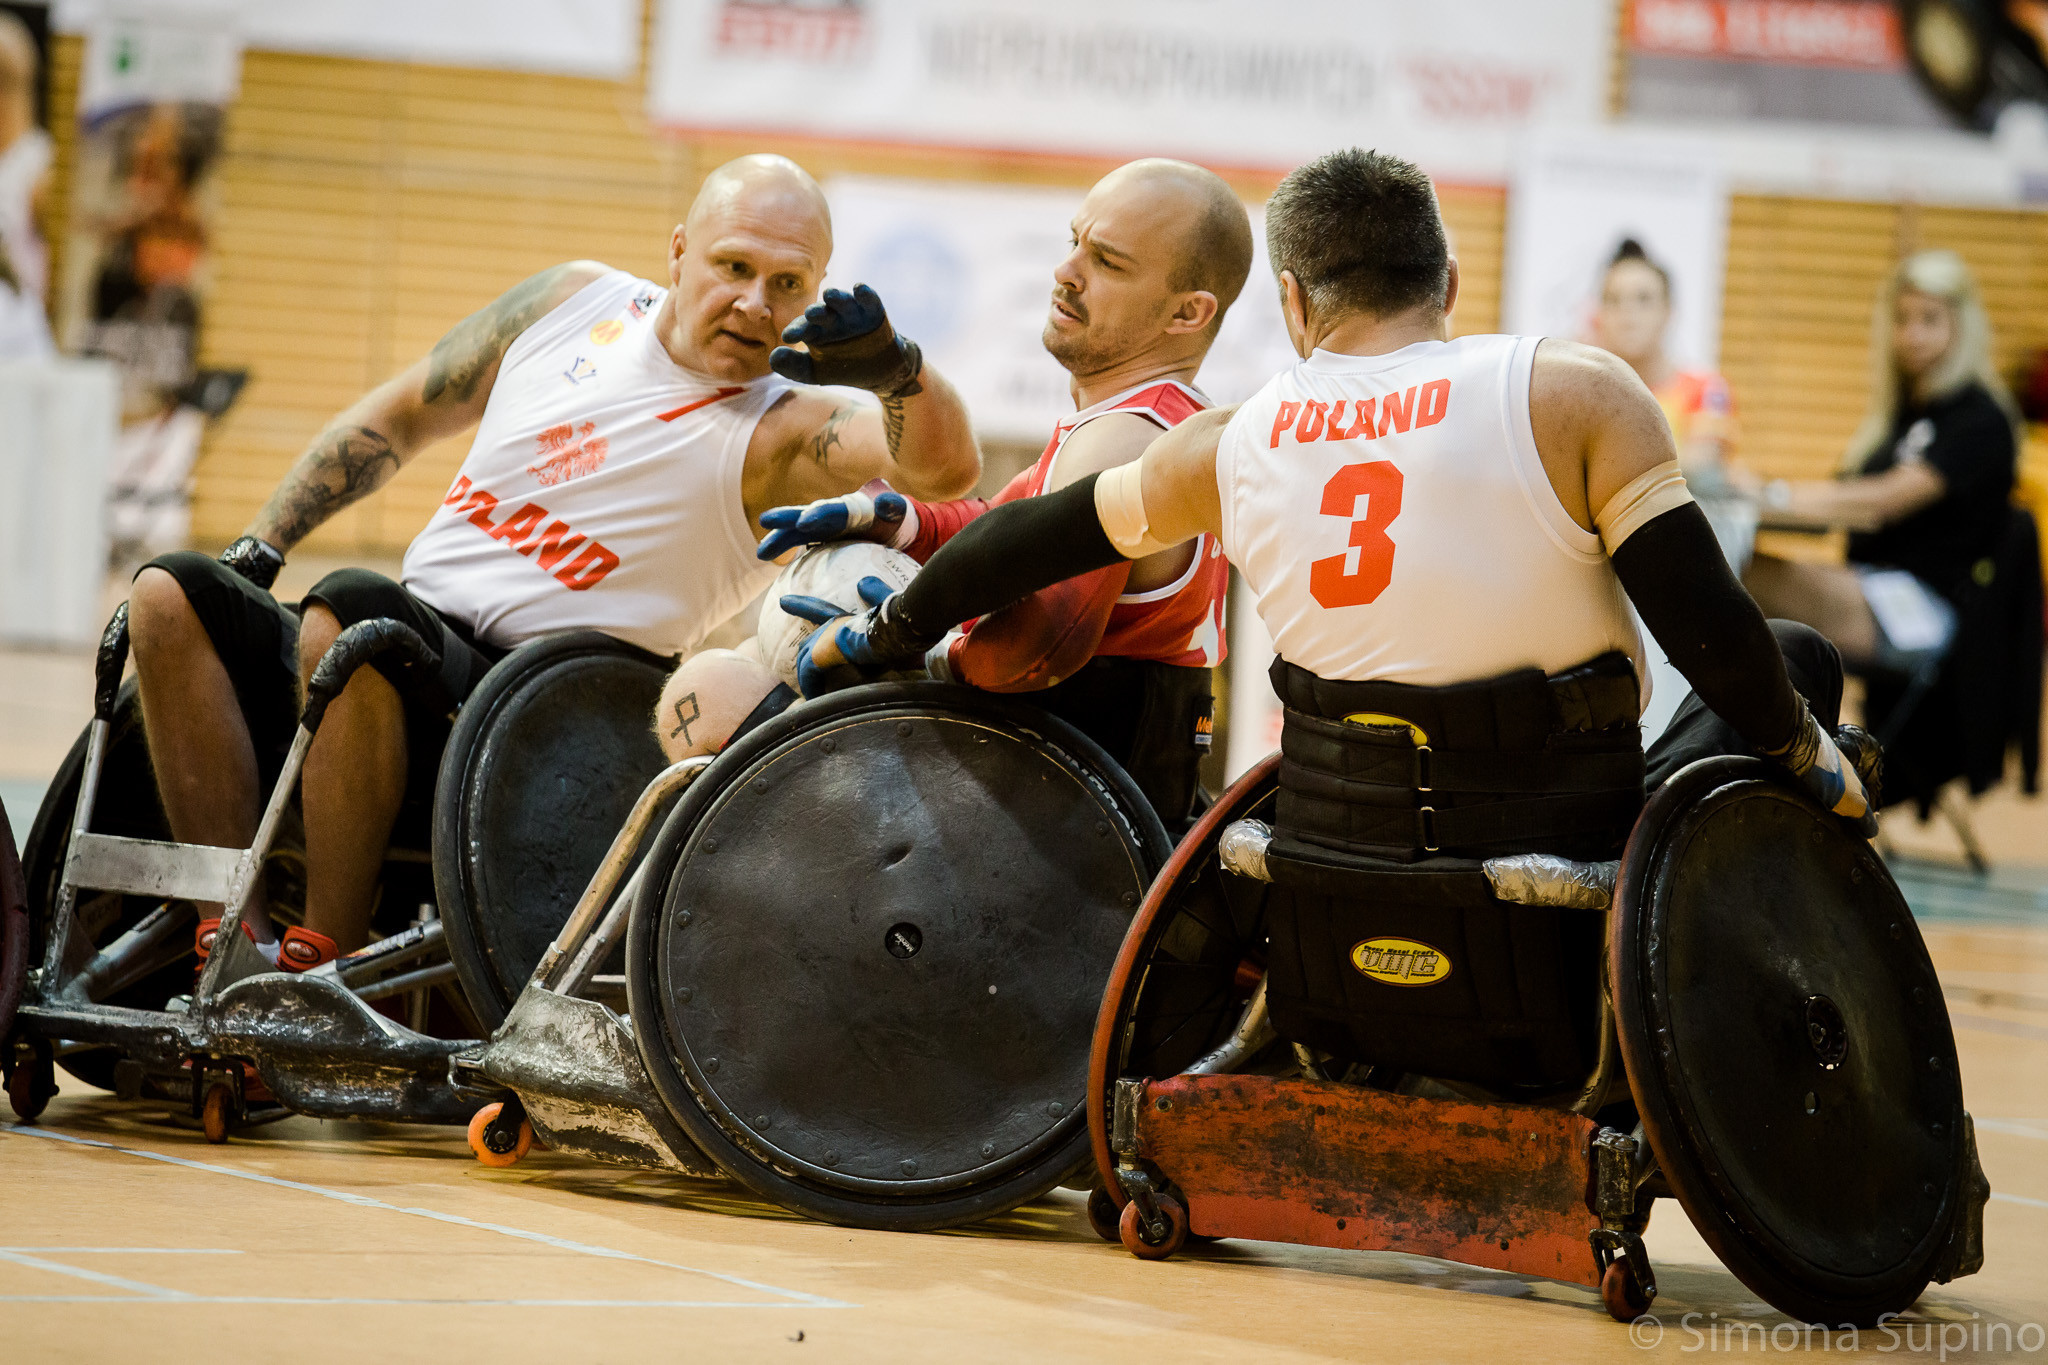 Poland's wheelchair rugby team in action in the Metro Cup last year ©IWRF